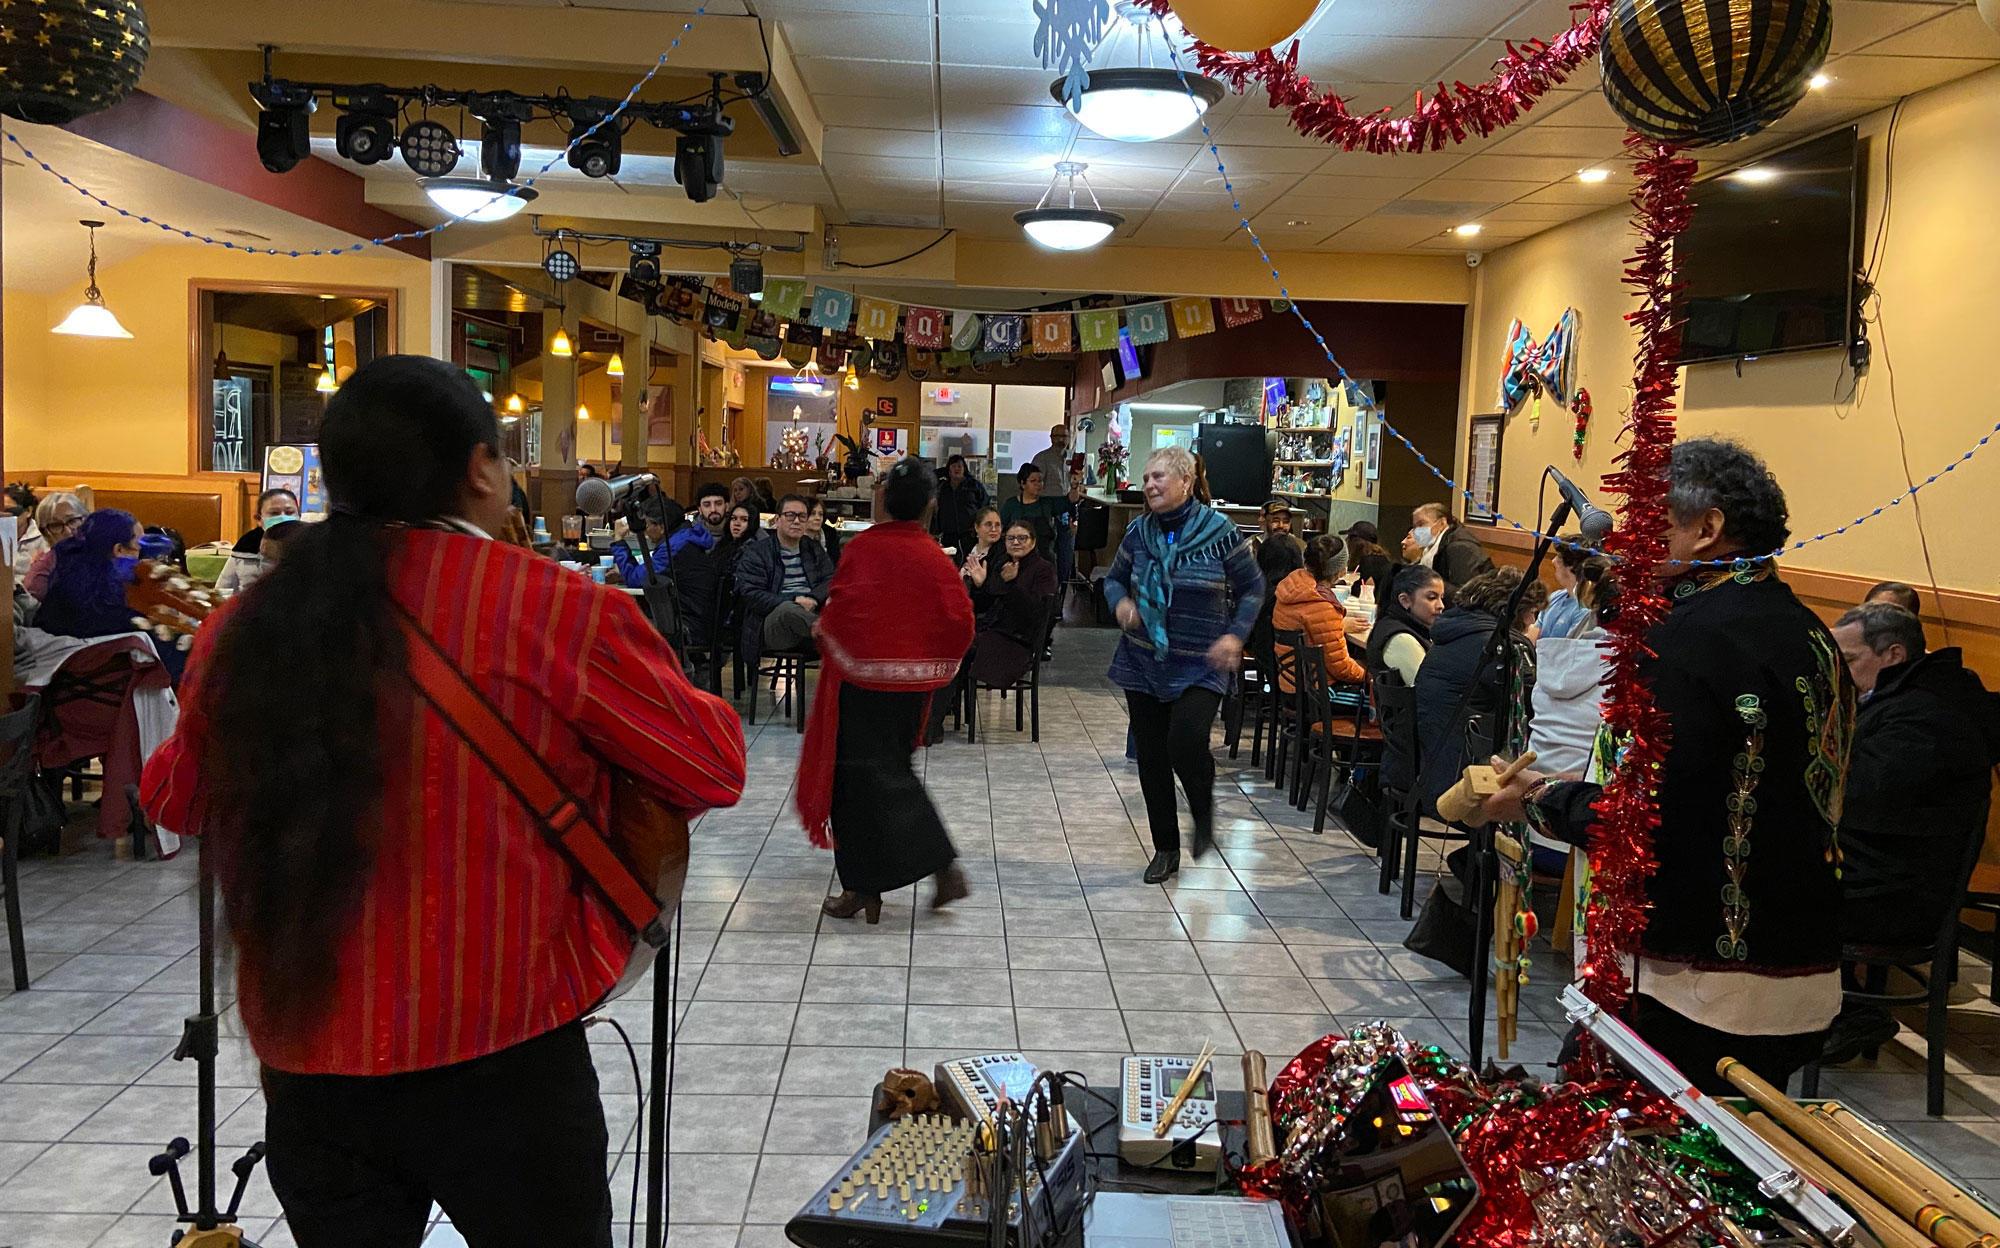 Latino women are on the dance floor as a band plays in a Mexican food restaurant.